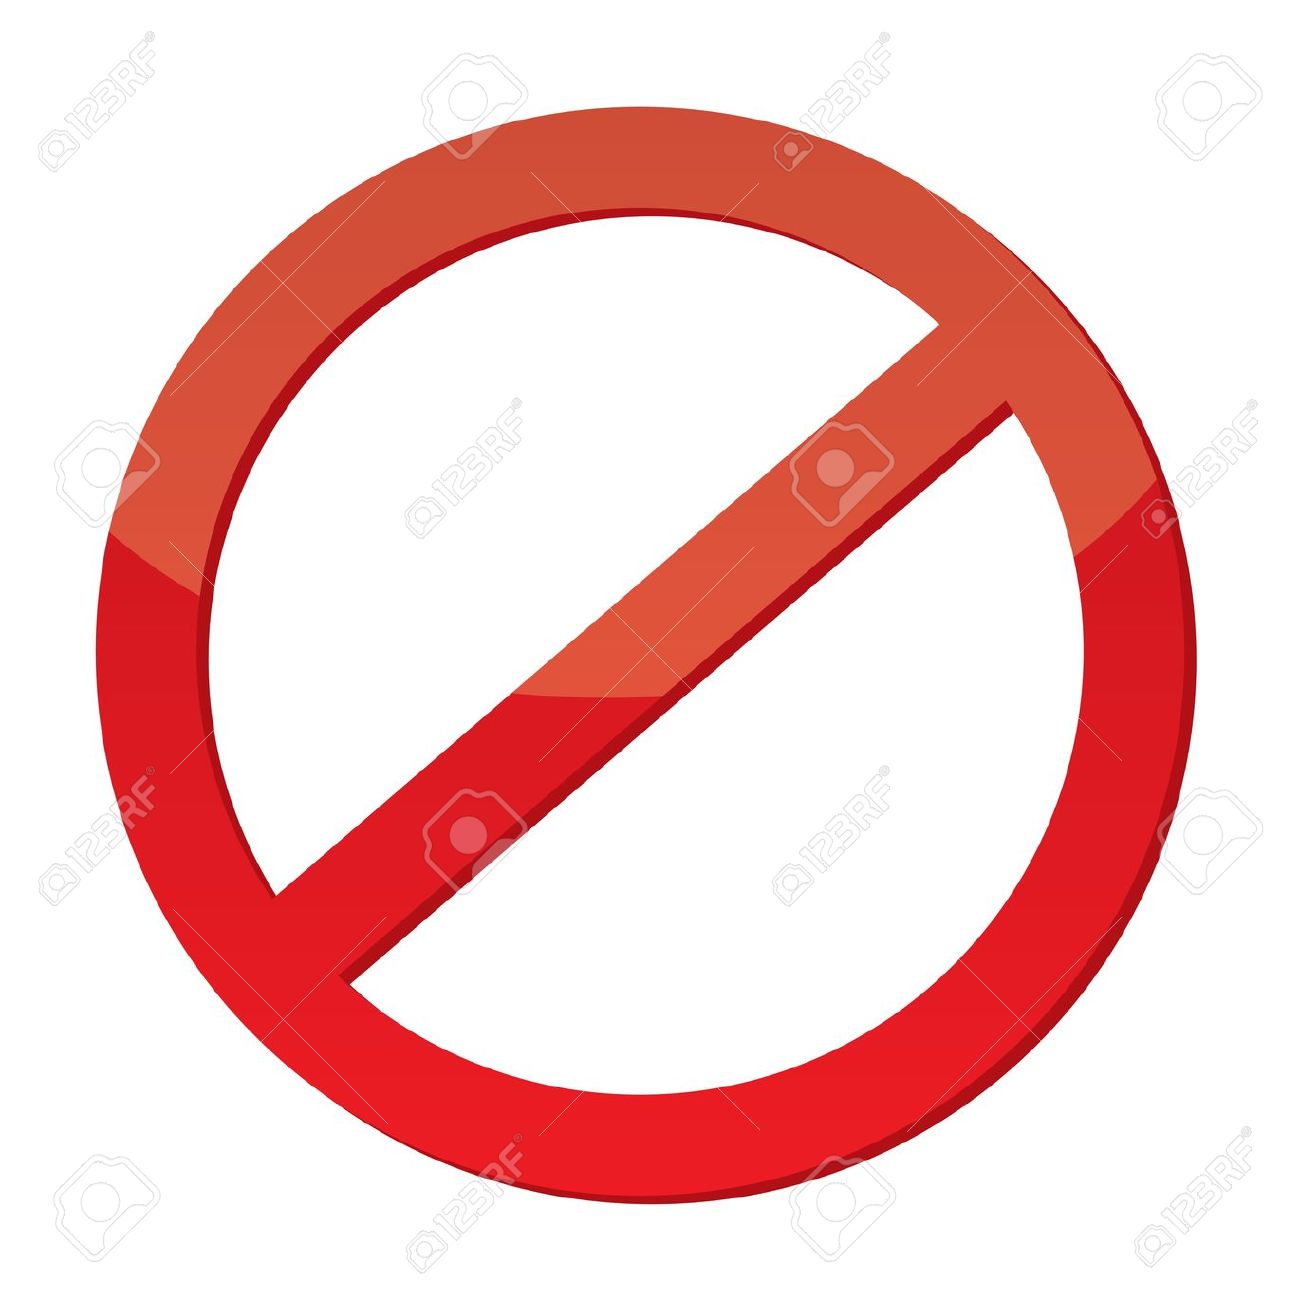 Restriction sign clipart.